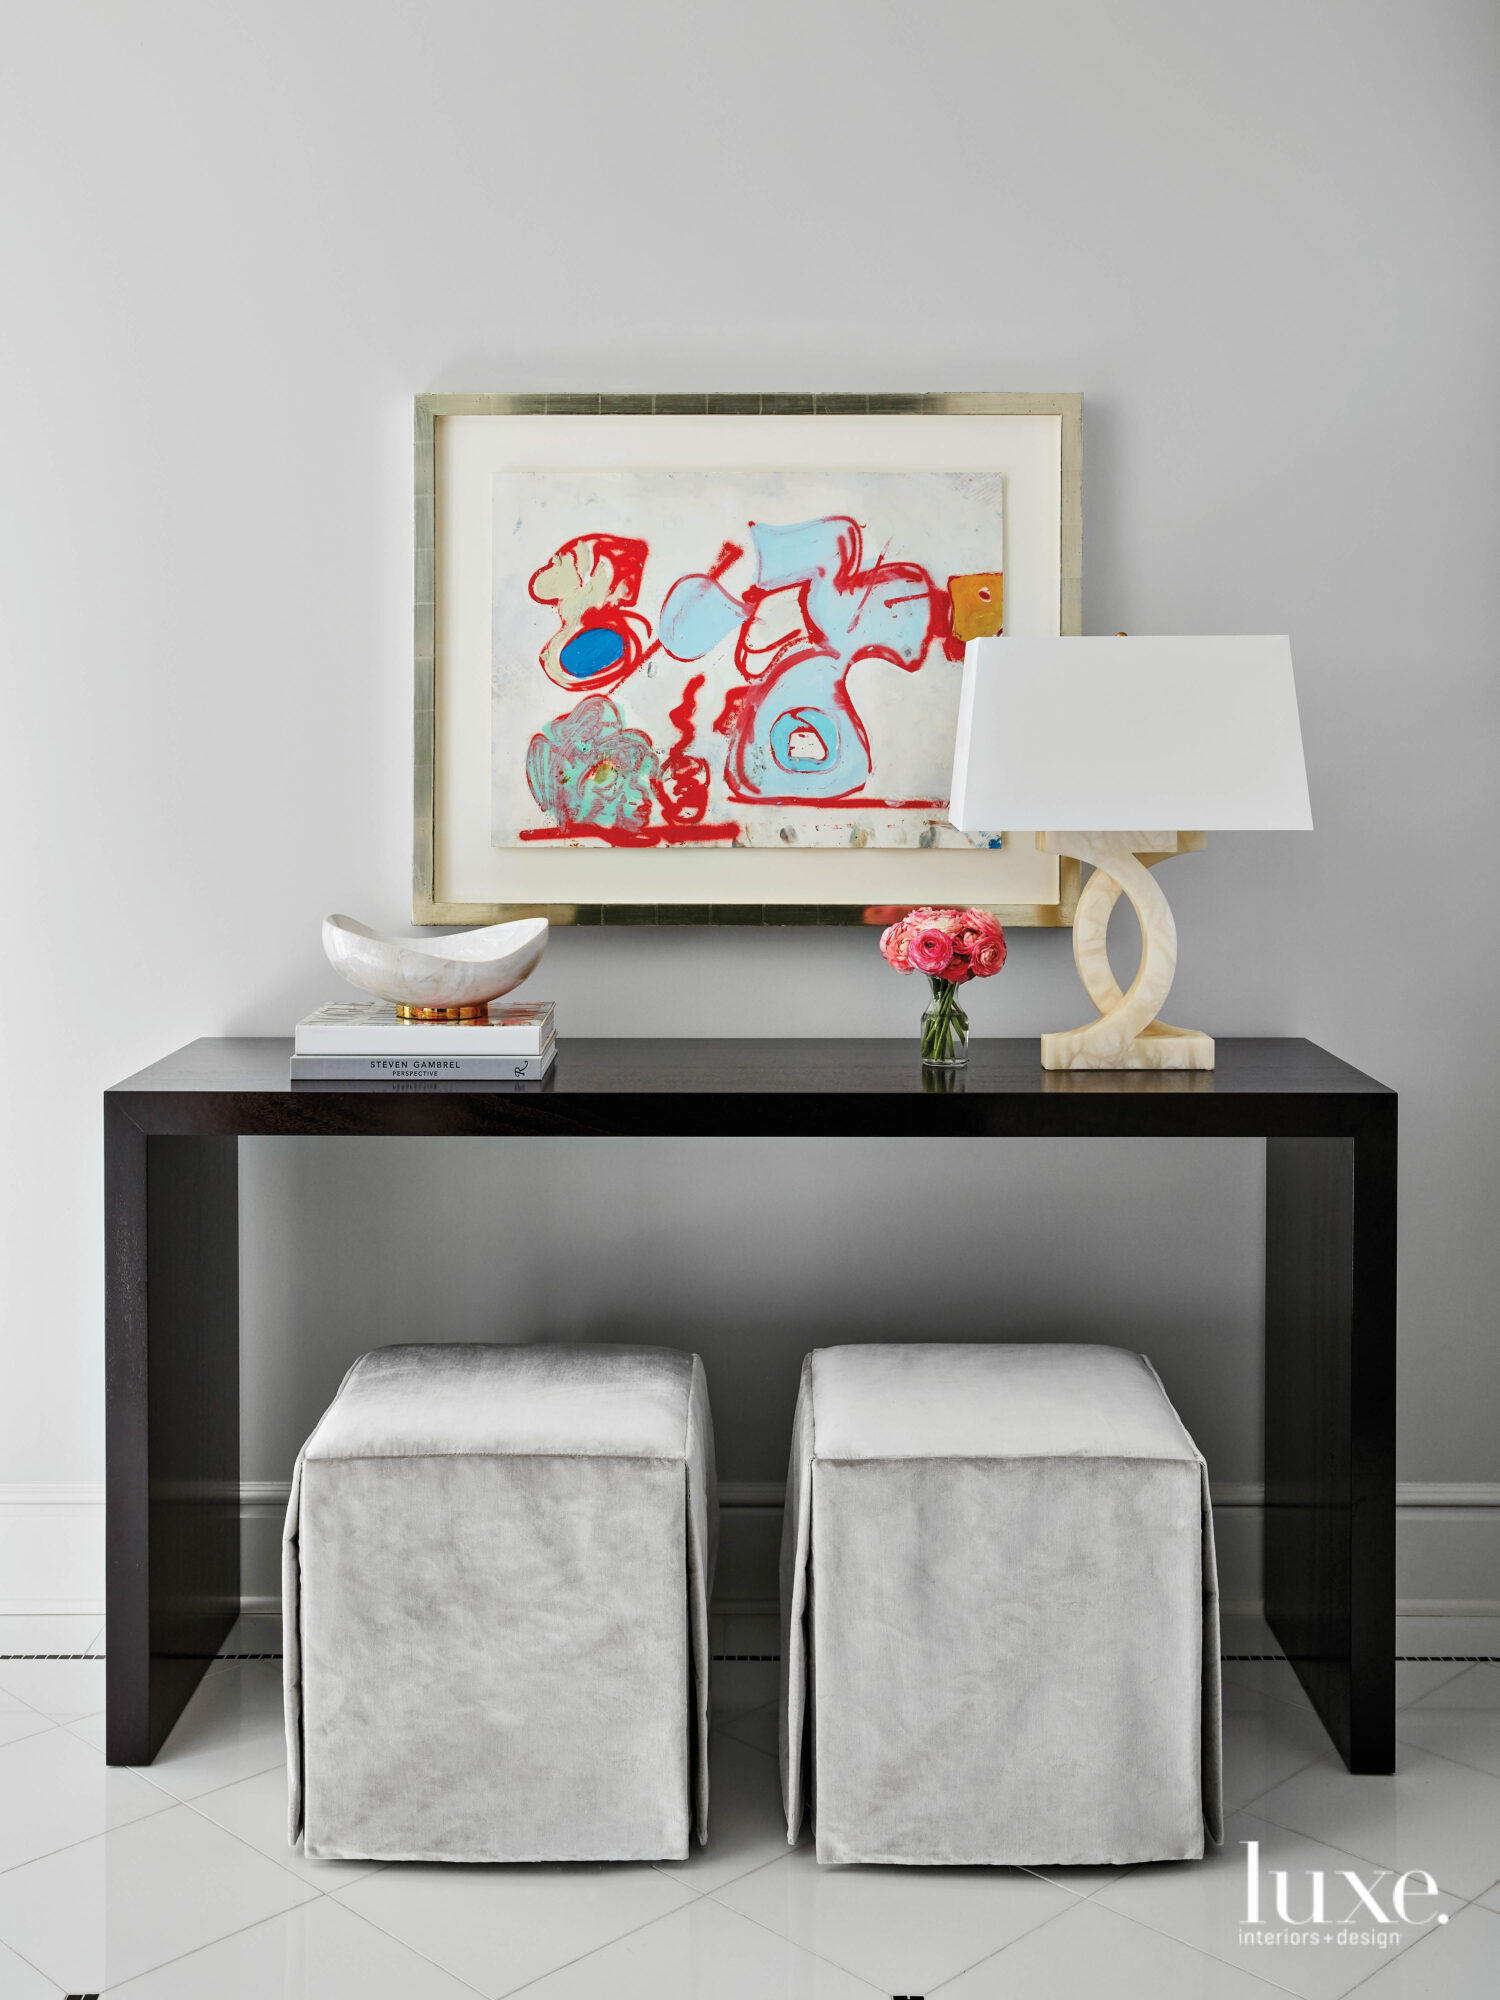 The entry foyer with a black console, gray upholstered stools and a bright Eddie Martinez painting.